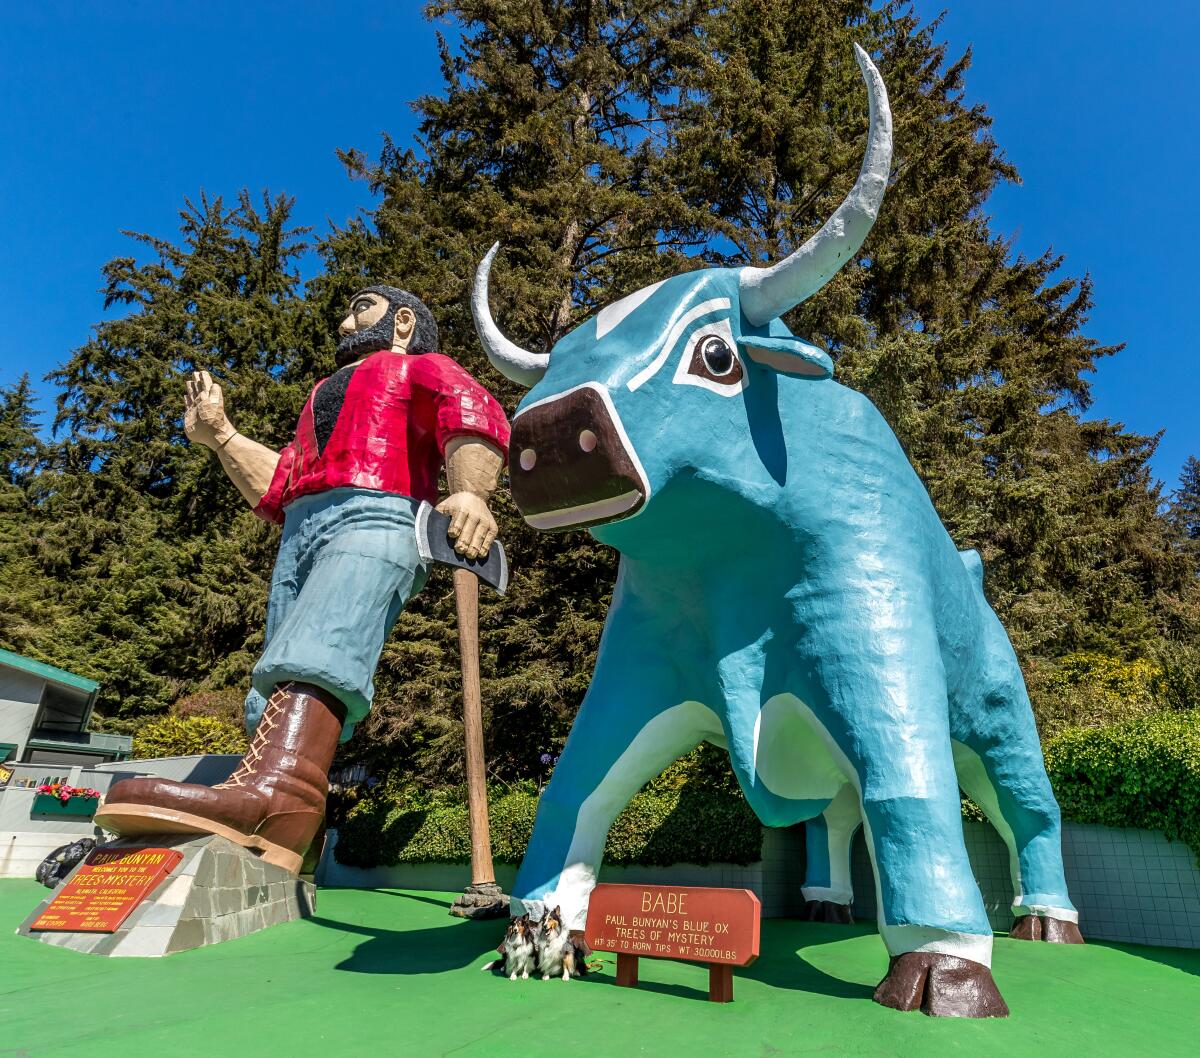 Two dogs sit in front of large statues of Paul Bunyan and Babe the Blue Ox.